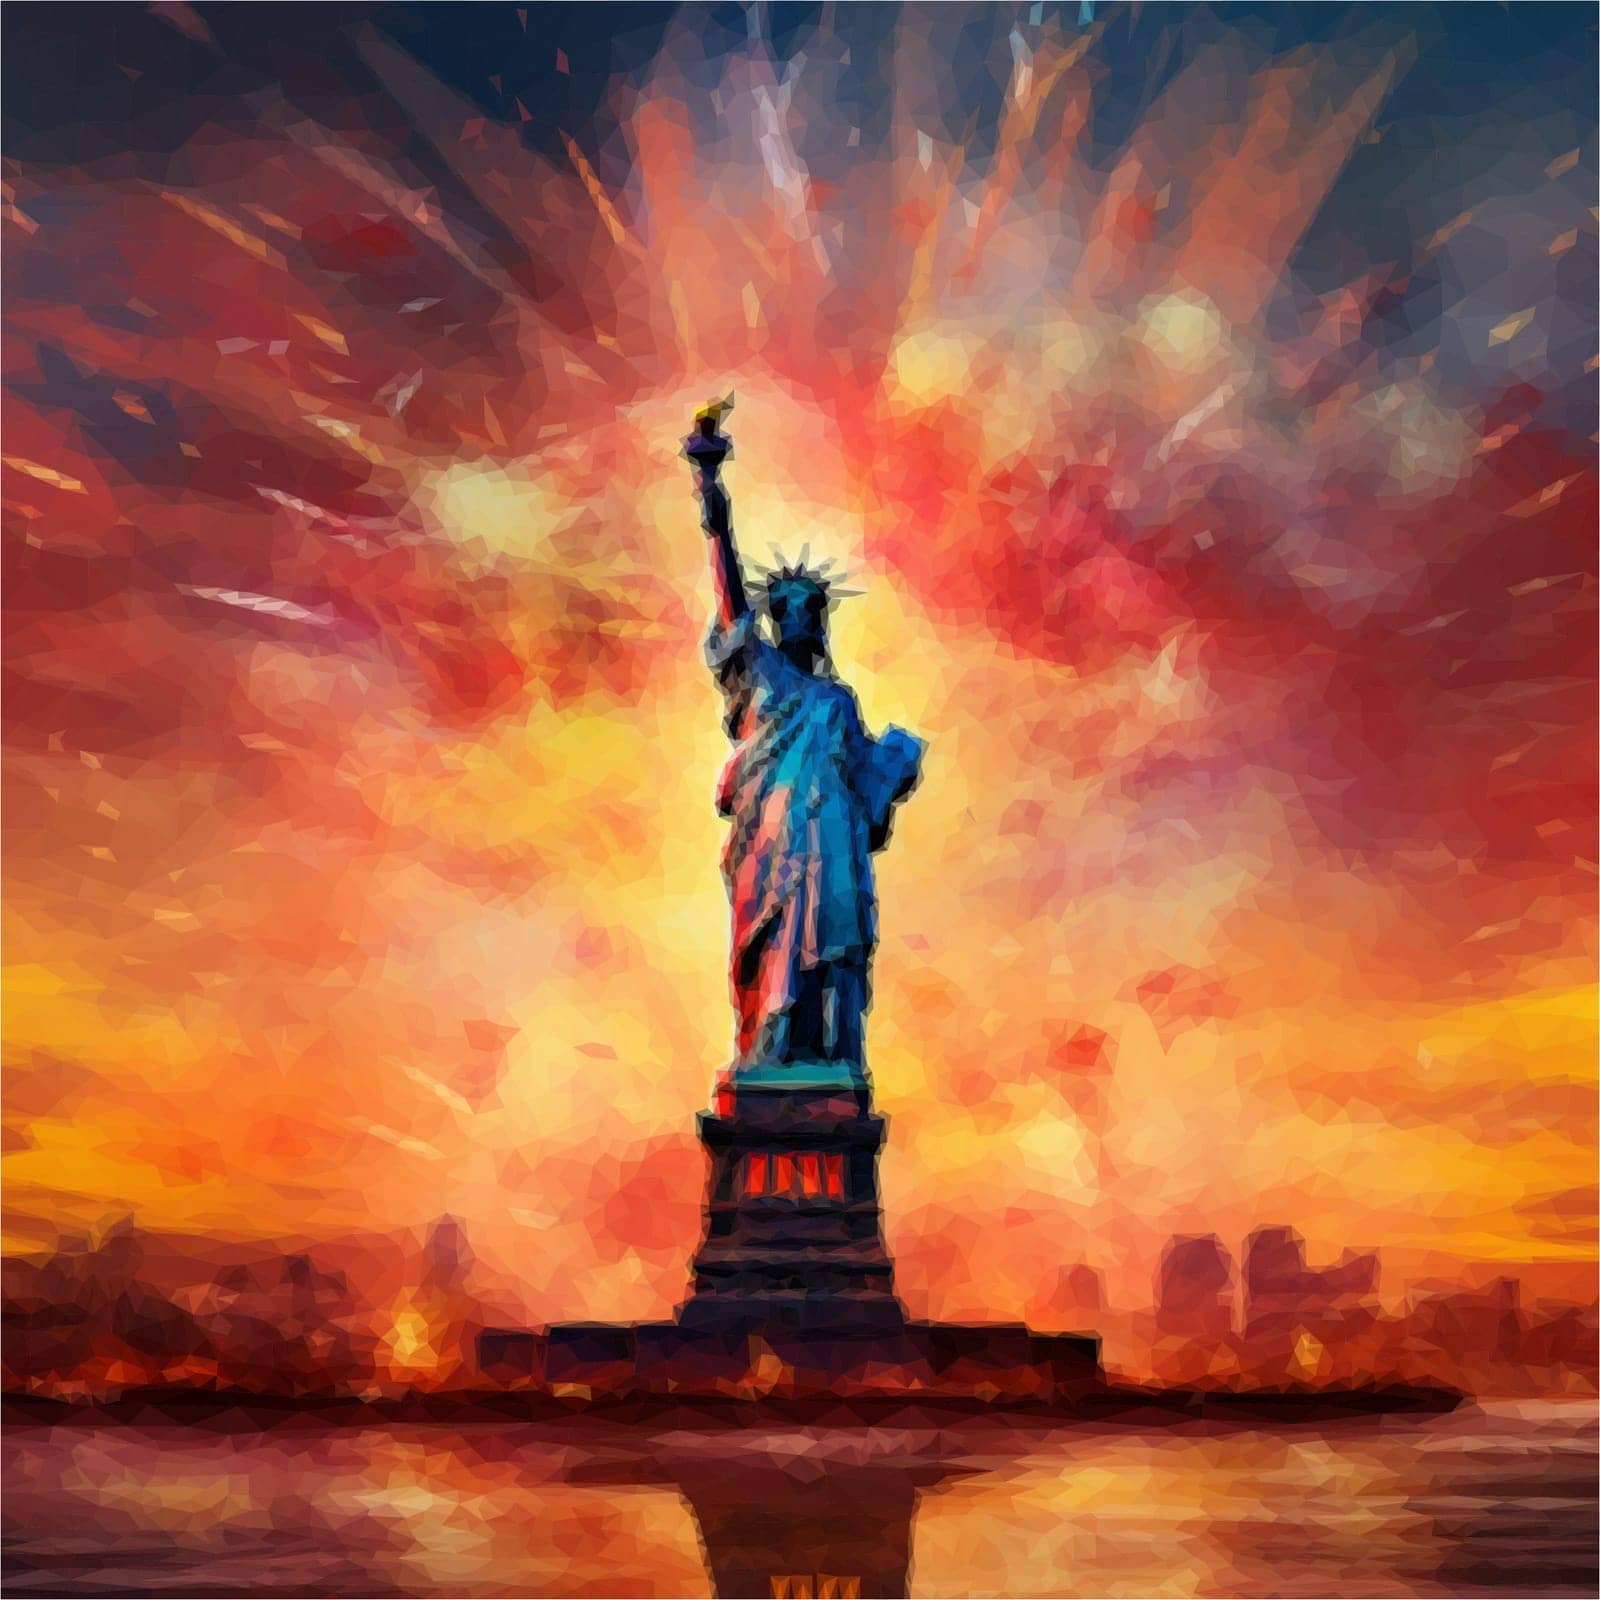 The Statue of Liberty in front of the night festive fireworks in honor of the US Independence Day. Vector illustration